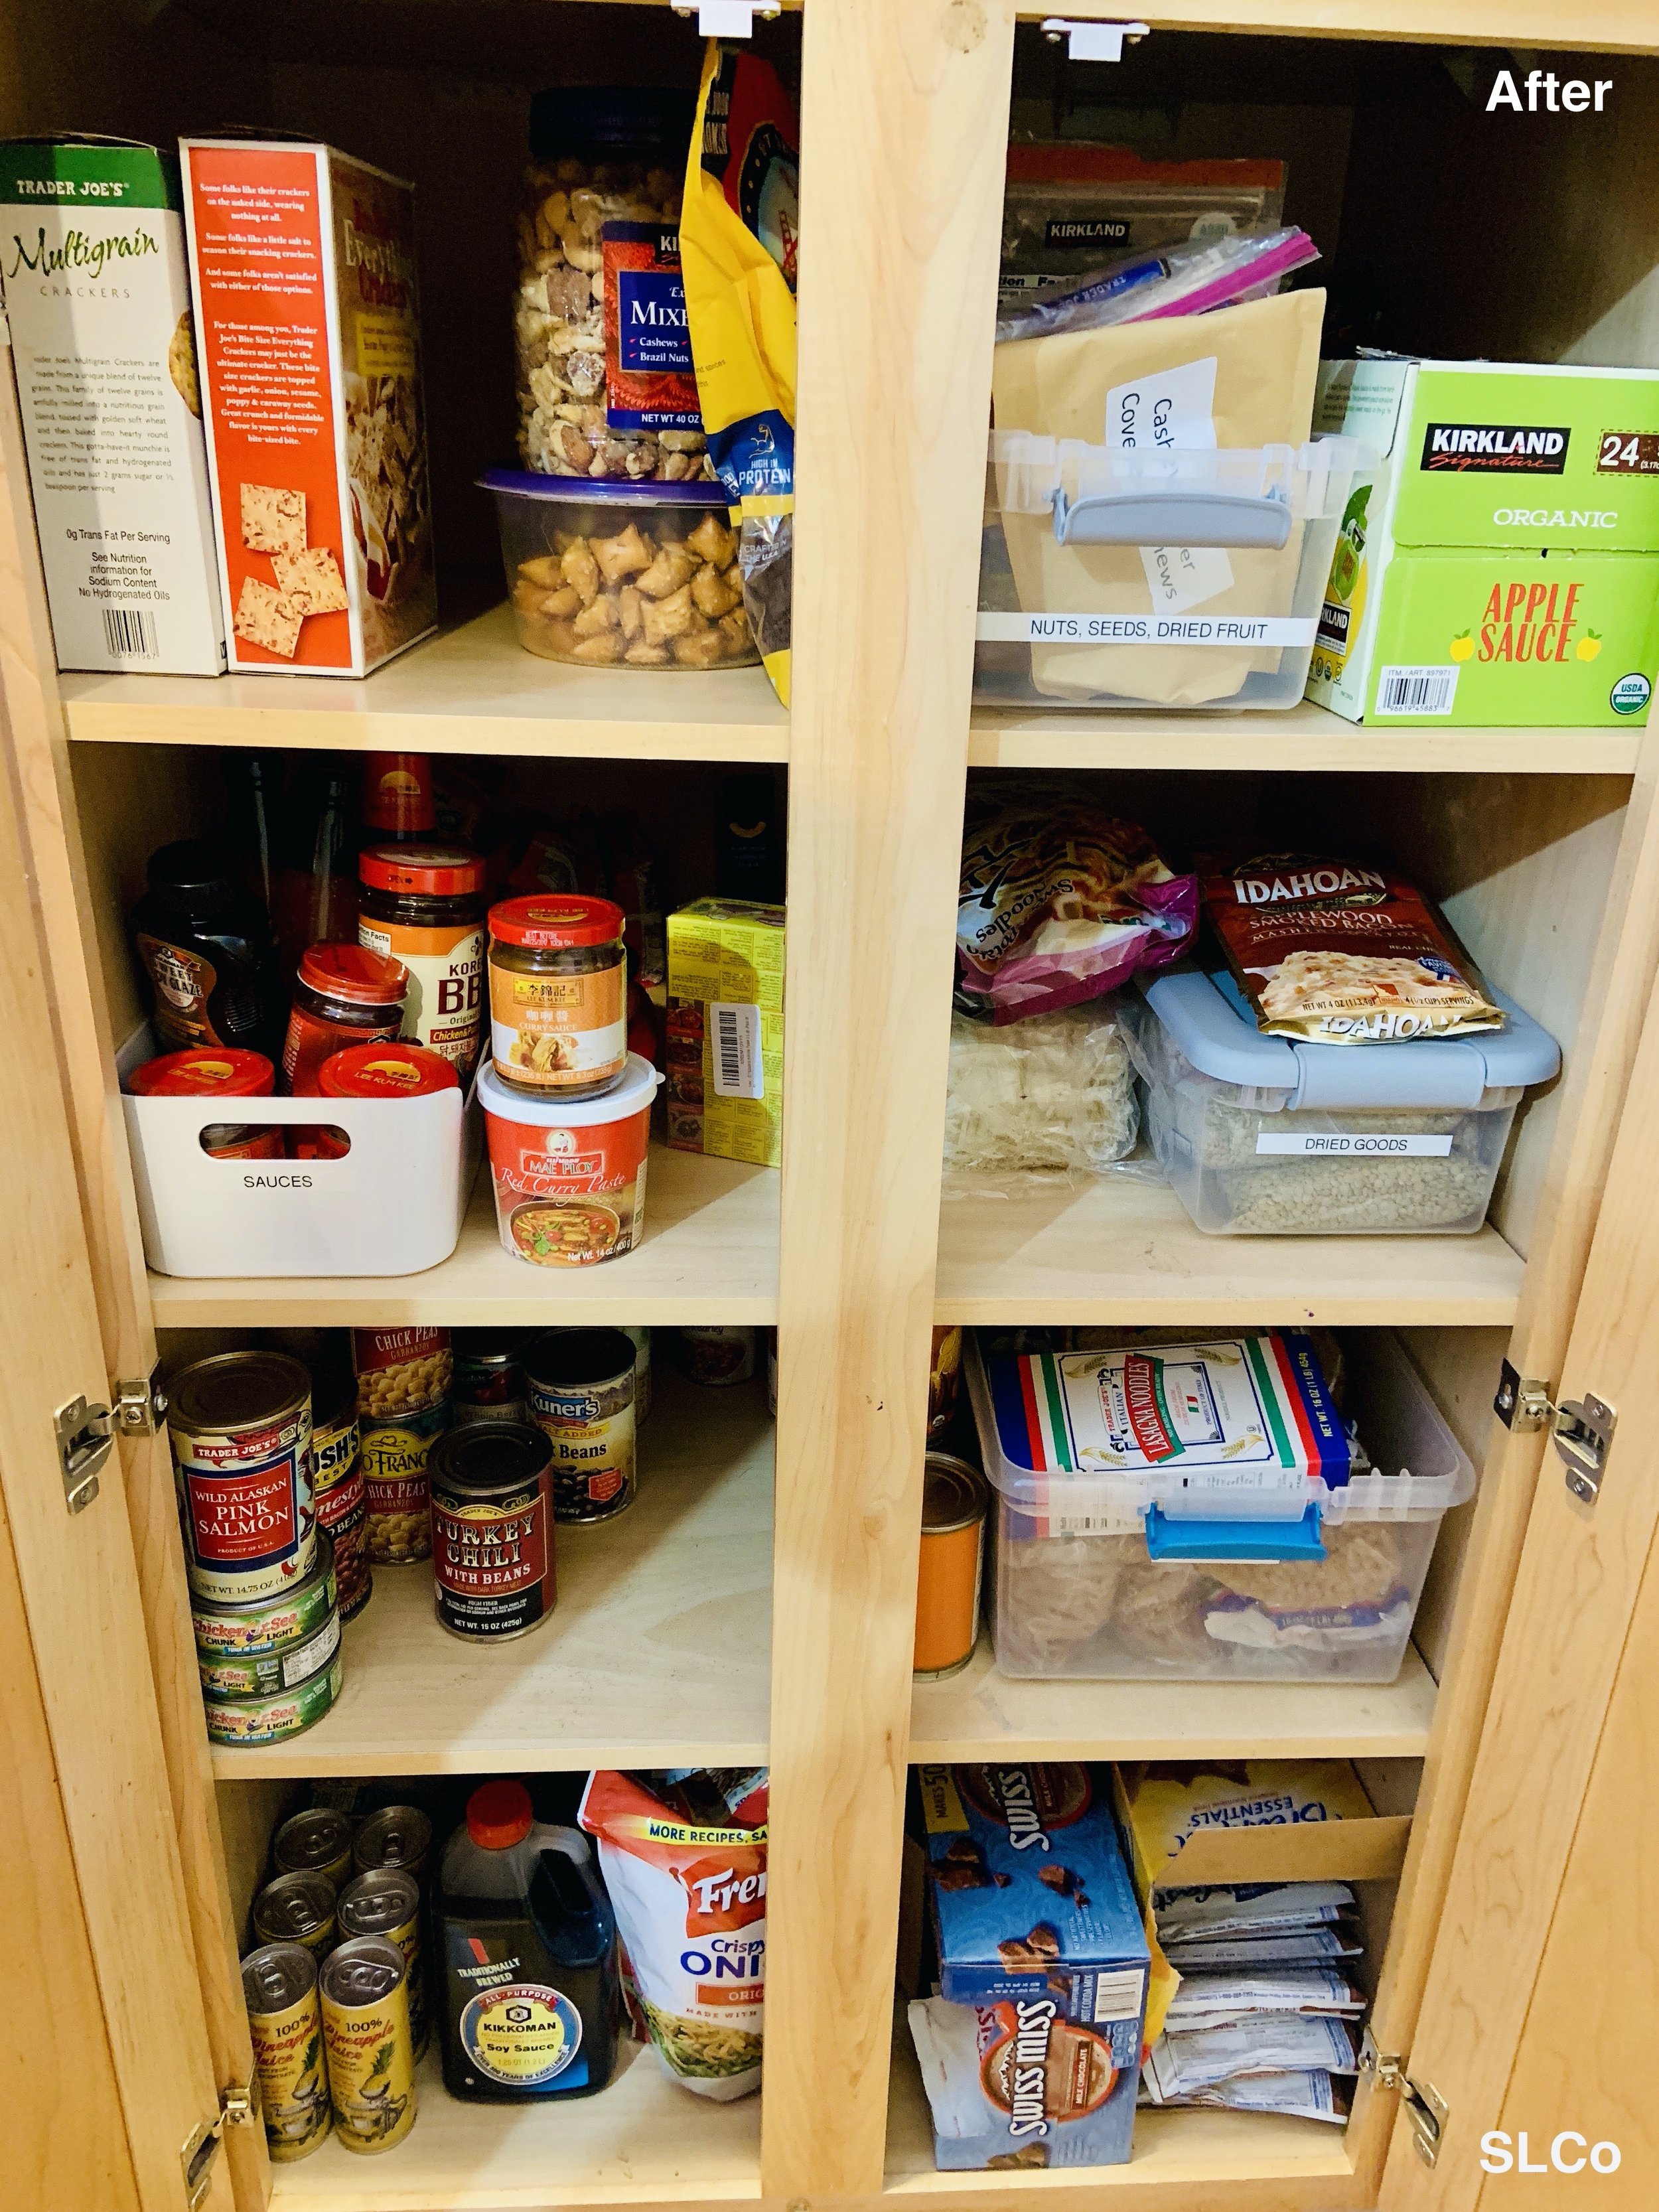 After photo of kitchen cabinet 4 shelves high organized with containers and by categorization for cereal, chips, cans, etc.